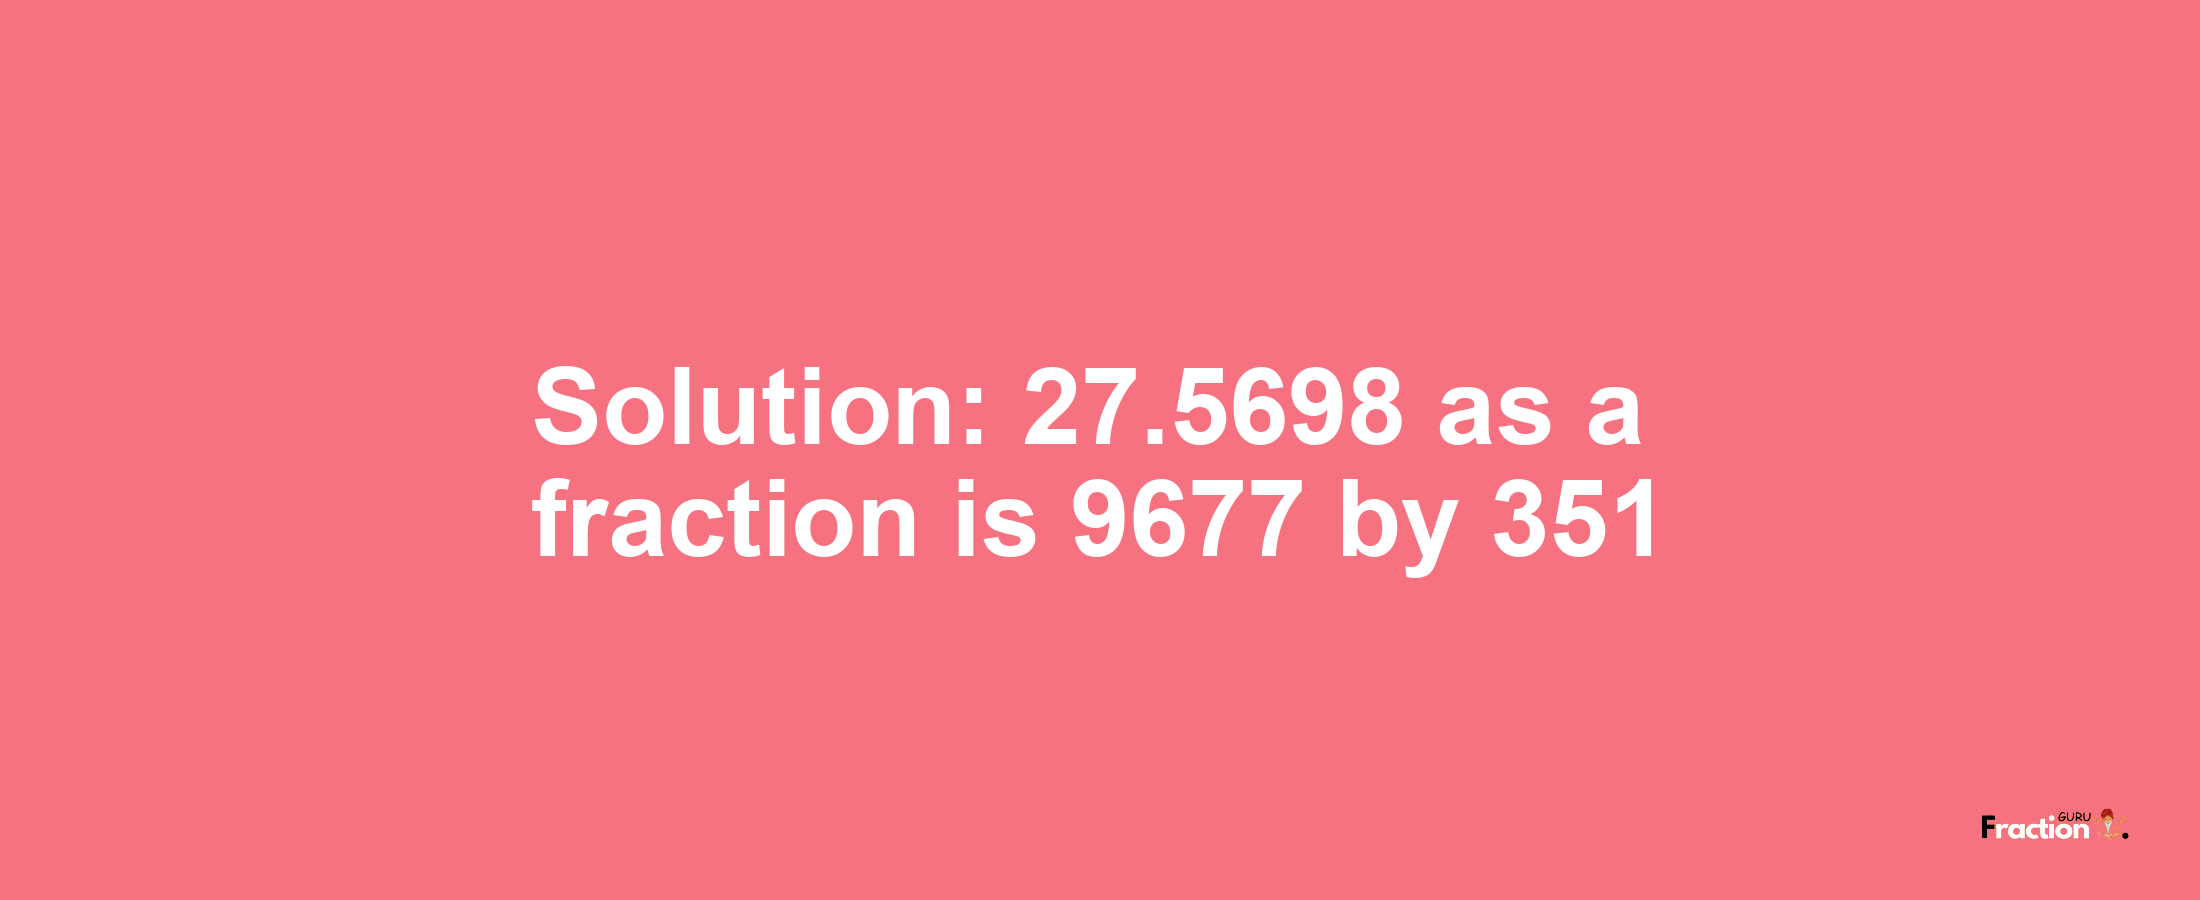 Solution:27.5698 as a fraction is 9677/351